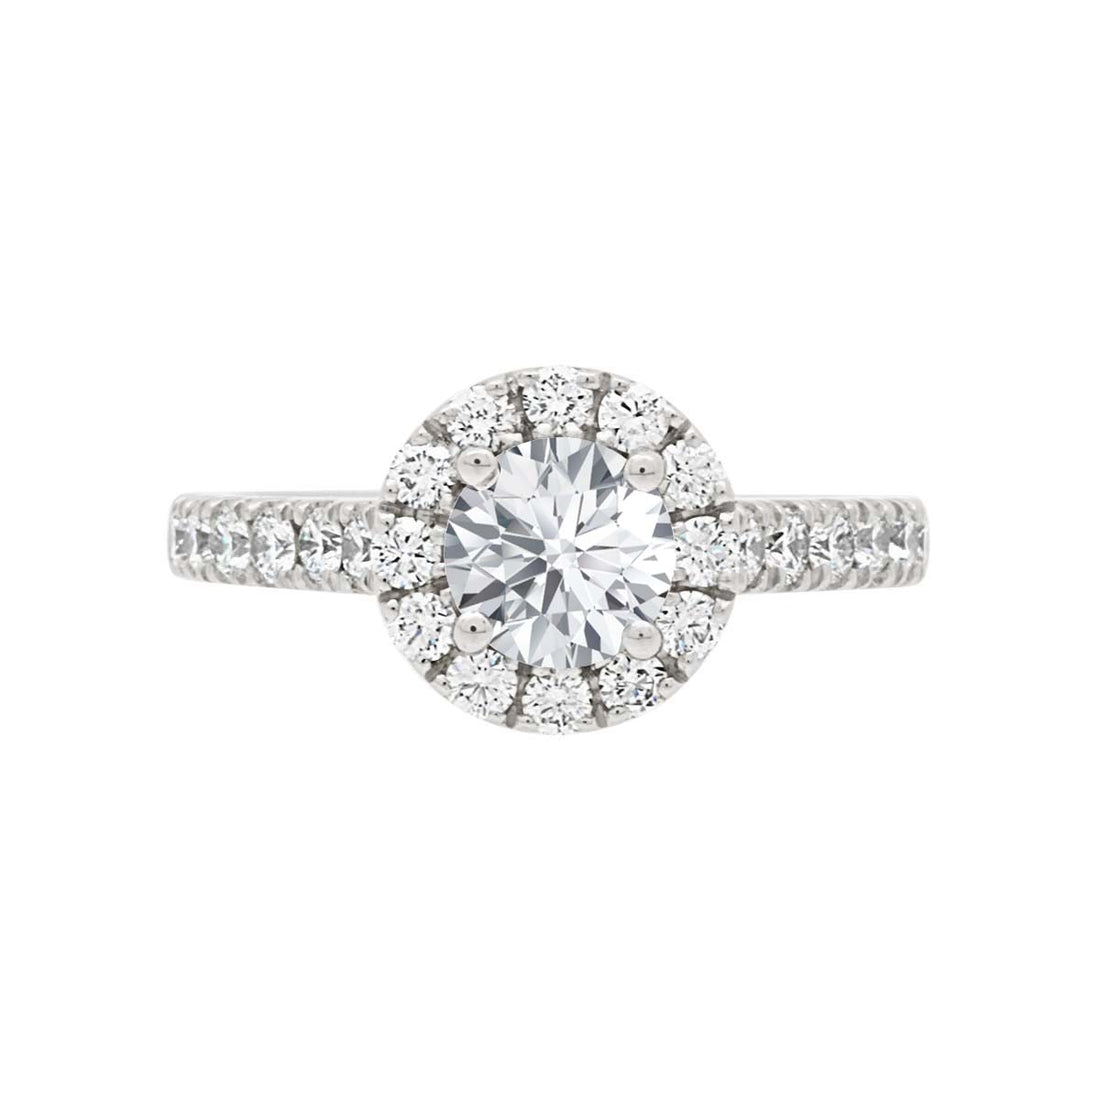 Halo Engagement Ring Diamond Band in white gold laying flat